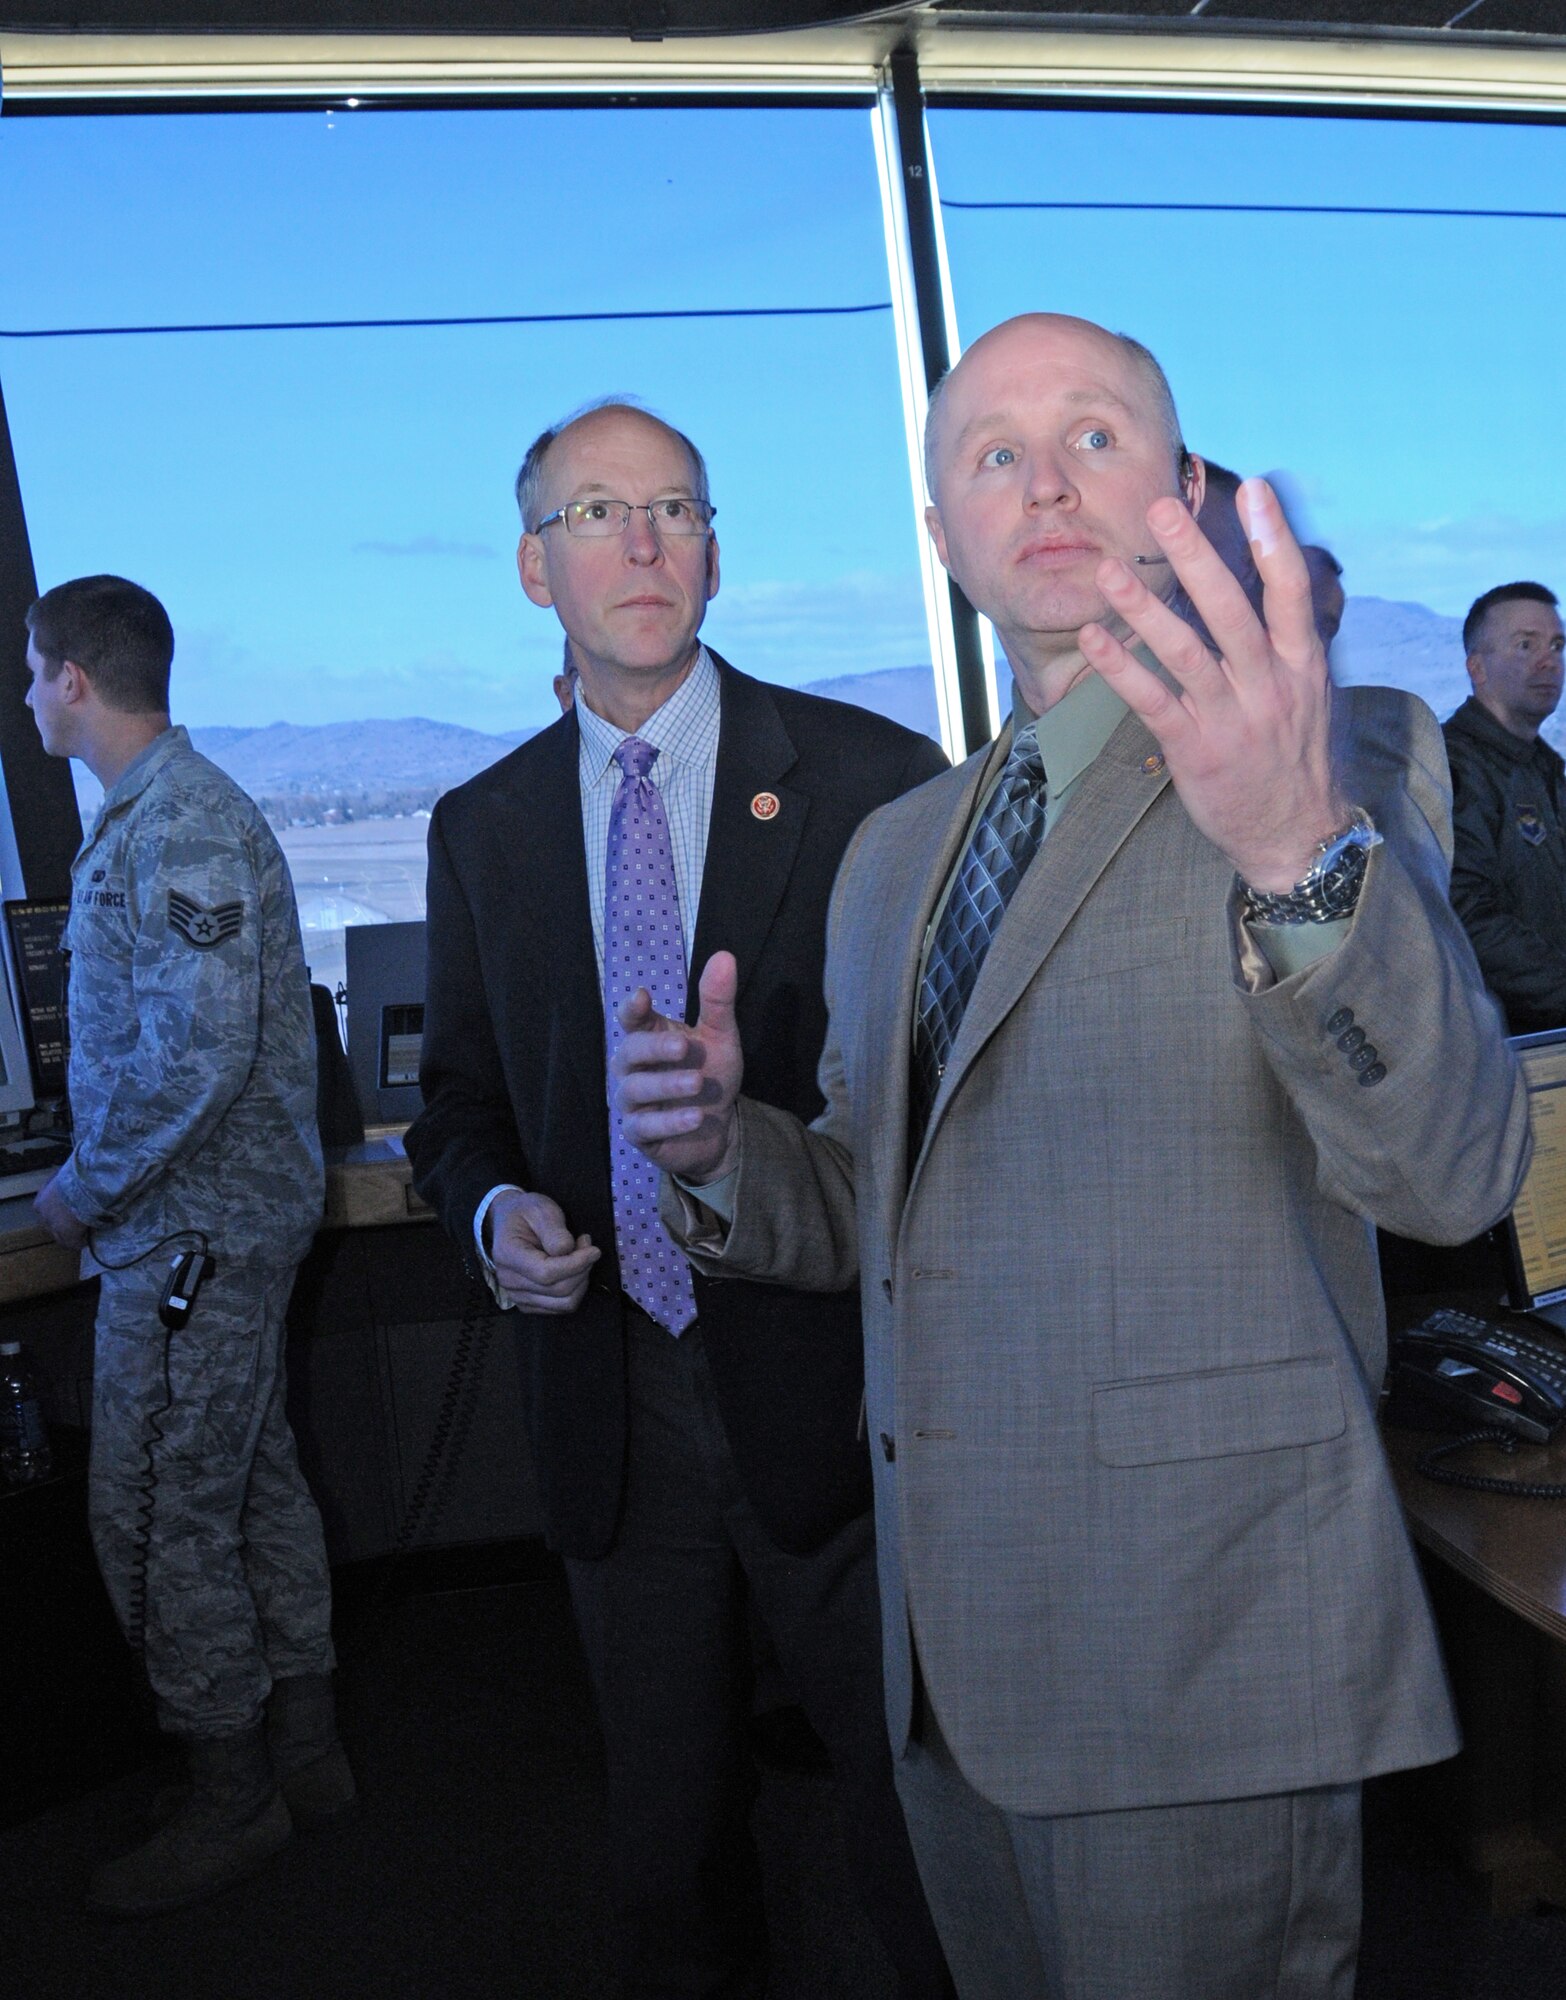 Congressman Greg Walden (R-Ore.) gets briefing by Doug Cunningham a civilian air traffic controller at the Kingsley Field Air Traffic Control Tower. Walden visited the tower in the wake of proposed sequestration cuts threatening its eminent closure, March 22, 2013. During his tour of the tower 270th Air Traffic Control Squadron personnel learned the tower has been removed from the FAA’s closure list prompting Walden to applaud and cite the cost effectiveness of the tower and its role in national security. (Air National Guard photo by Tech. Sgt. Jefferson Thompson, 173rd Fighter Wing Public Affairs Office)